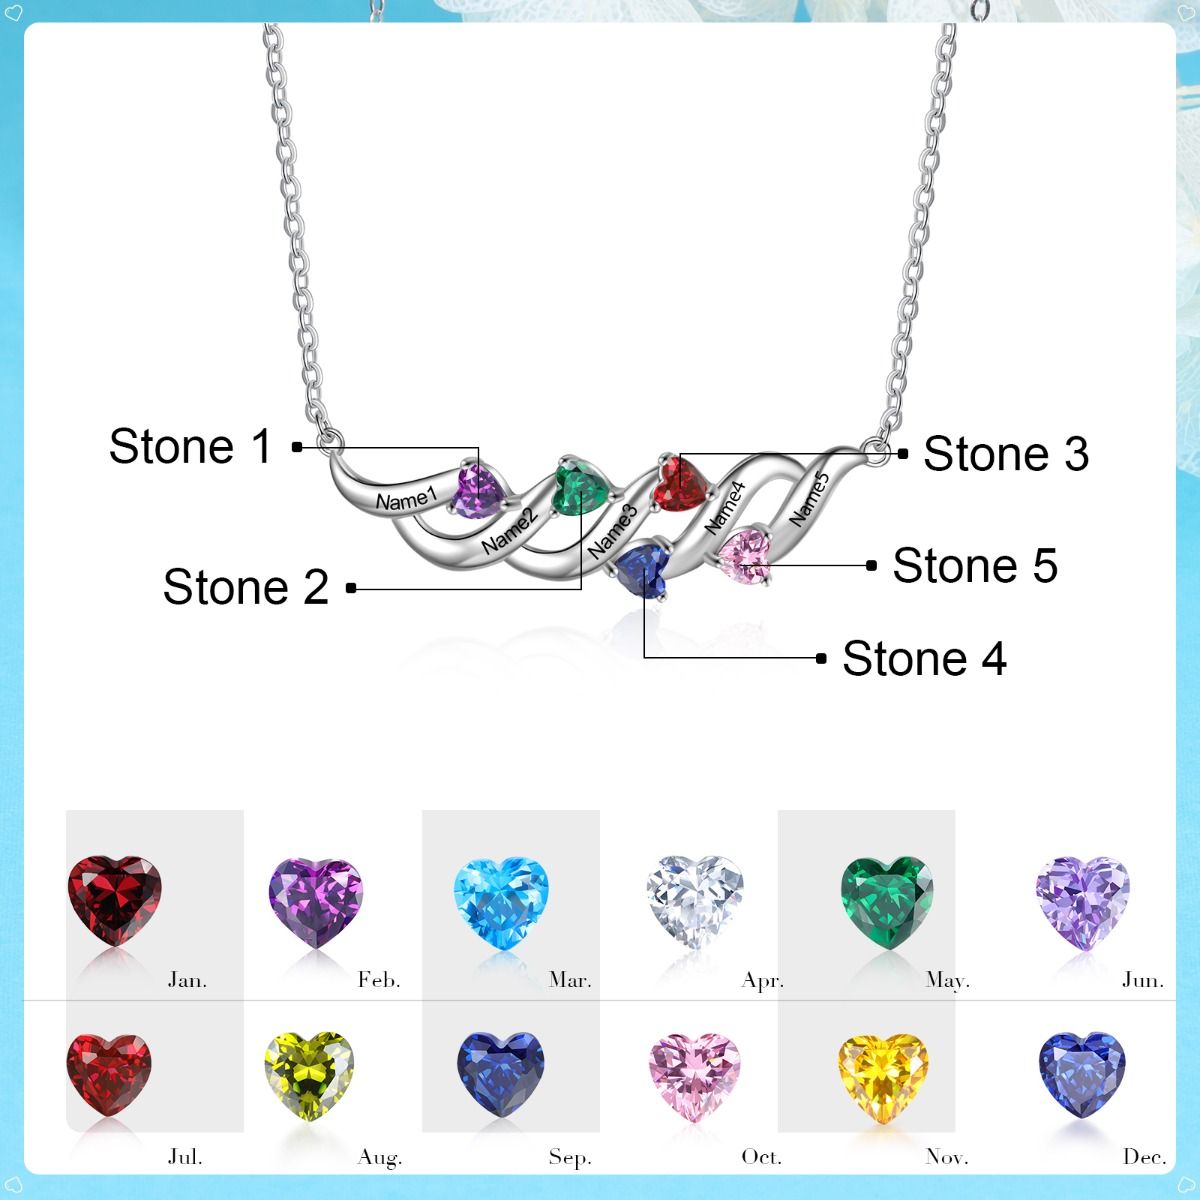 Personalised Necklace With birthstones And Engraved Names | Customised Gift For Mum